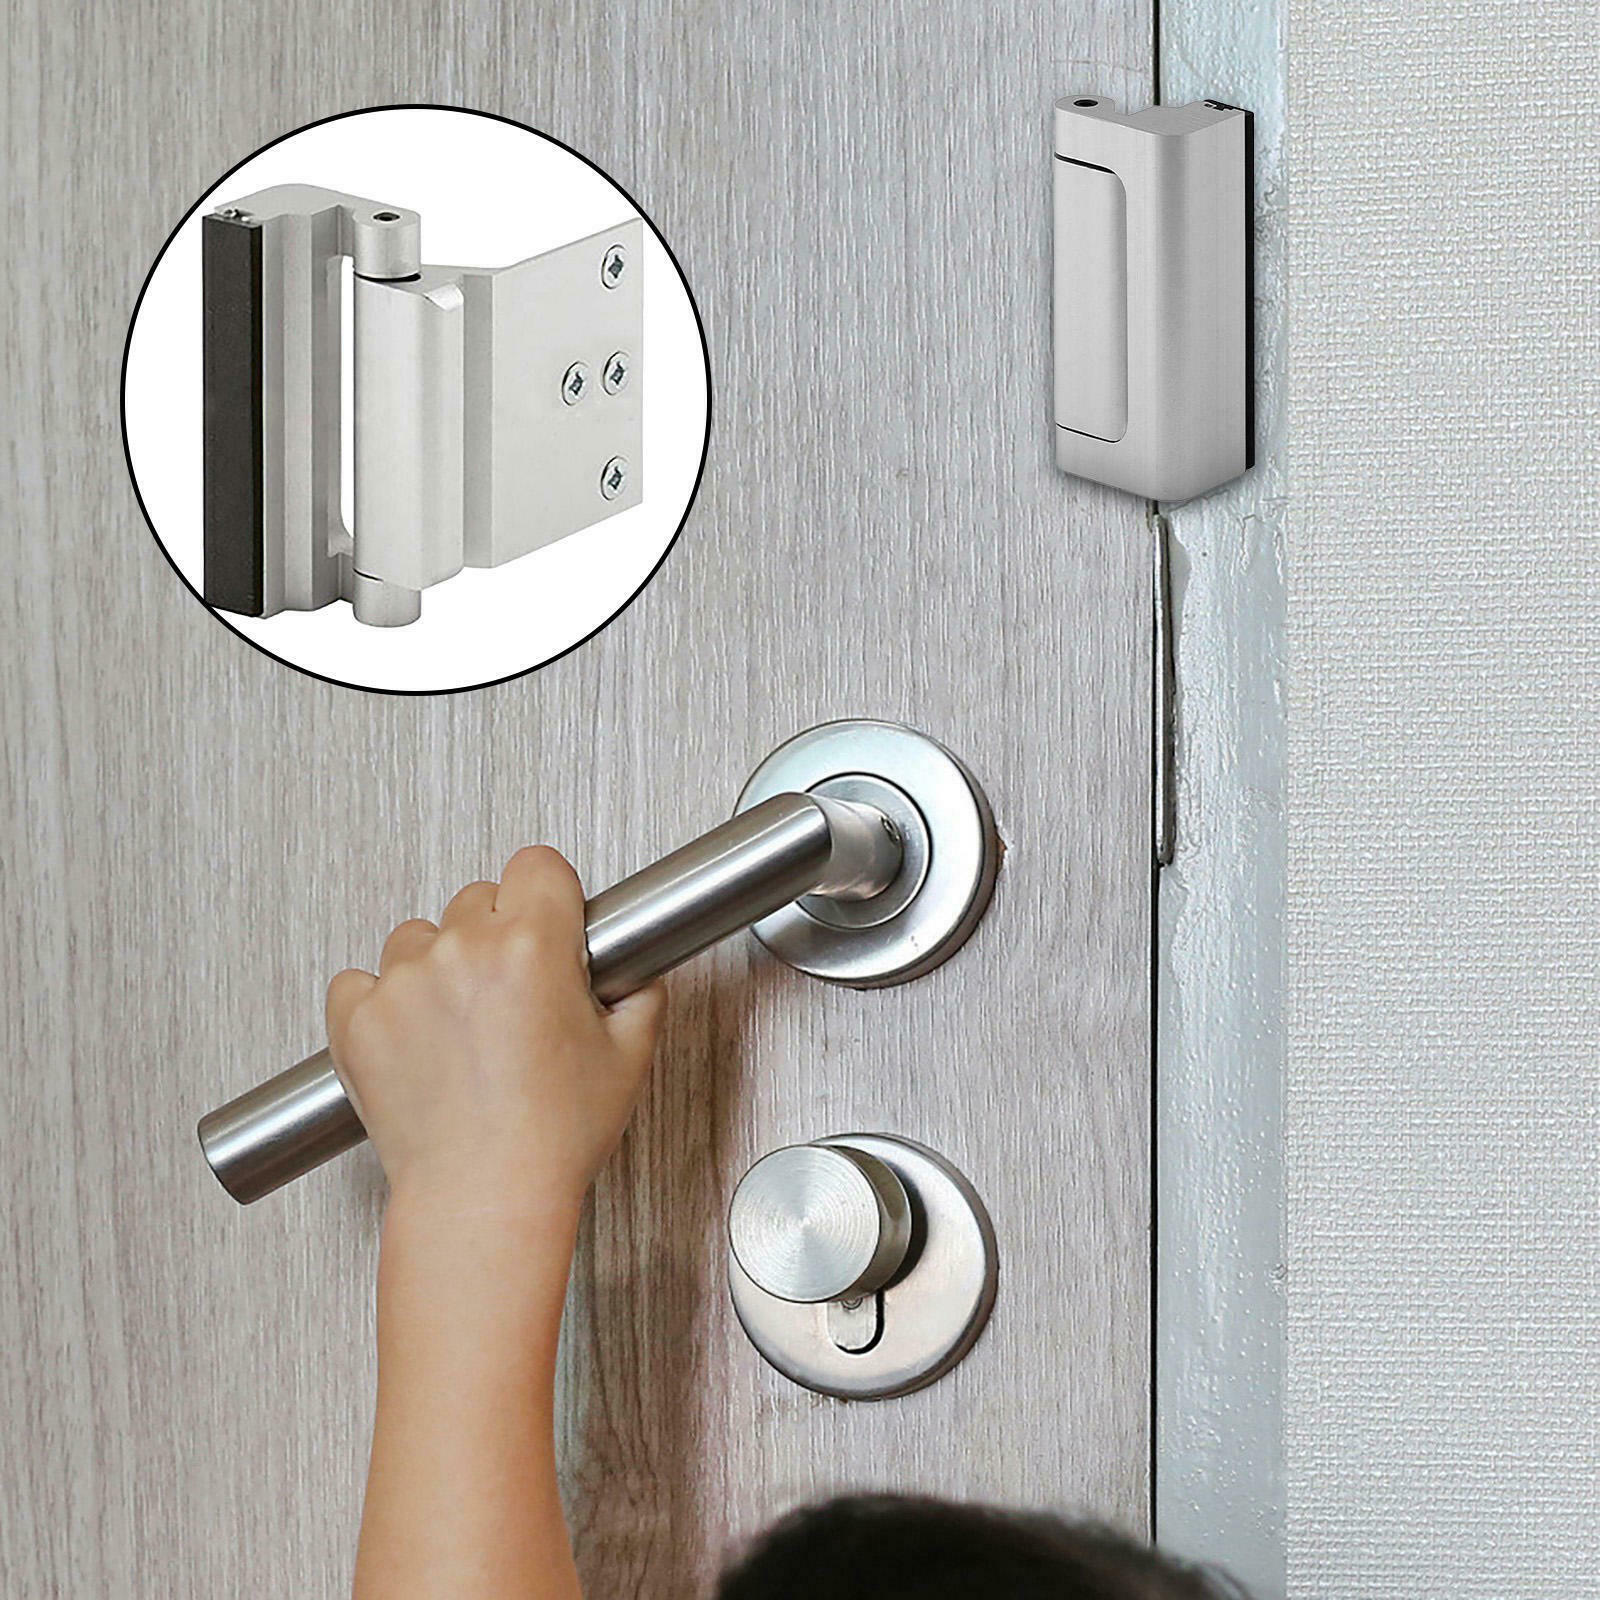 Home Security Door Lock Guard Latch Device for Safety Inward Swinging Home